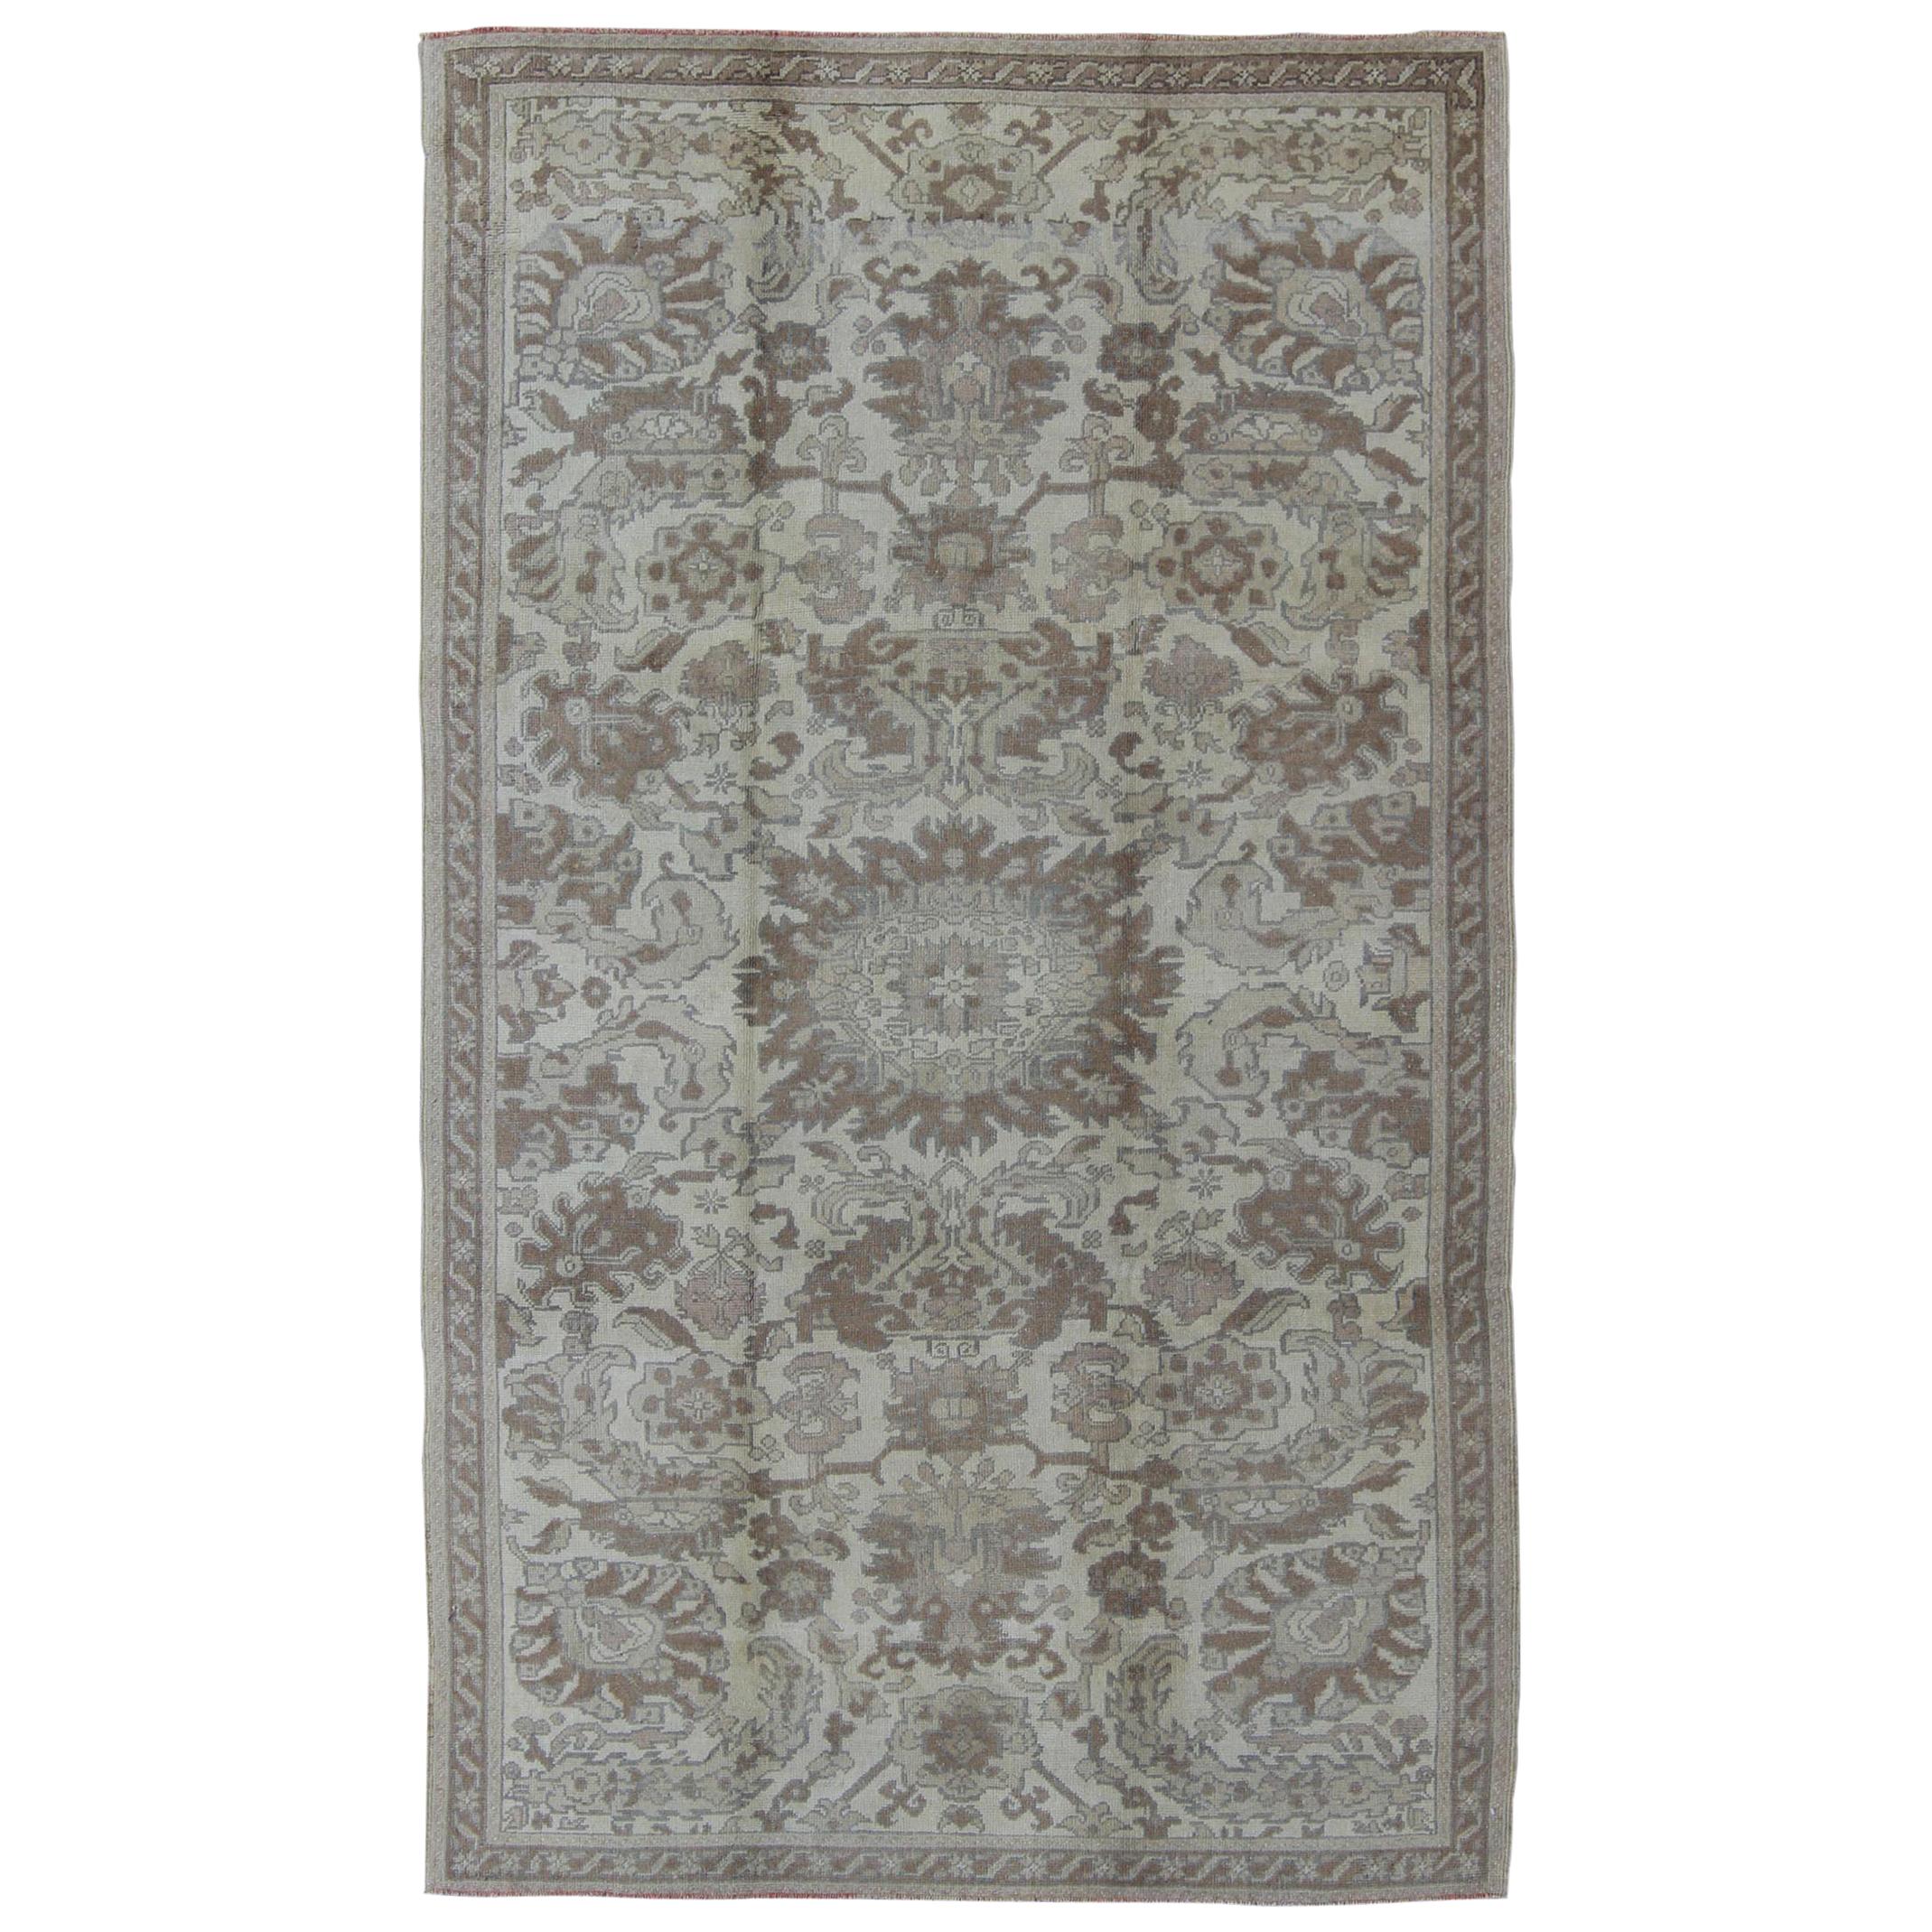 Earth Tone Vintage Turkish Oushak Rug with All-Over Floral Design